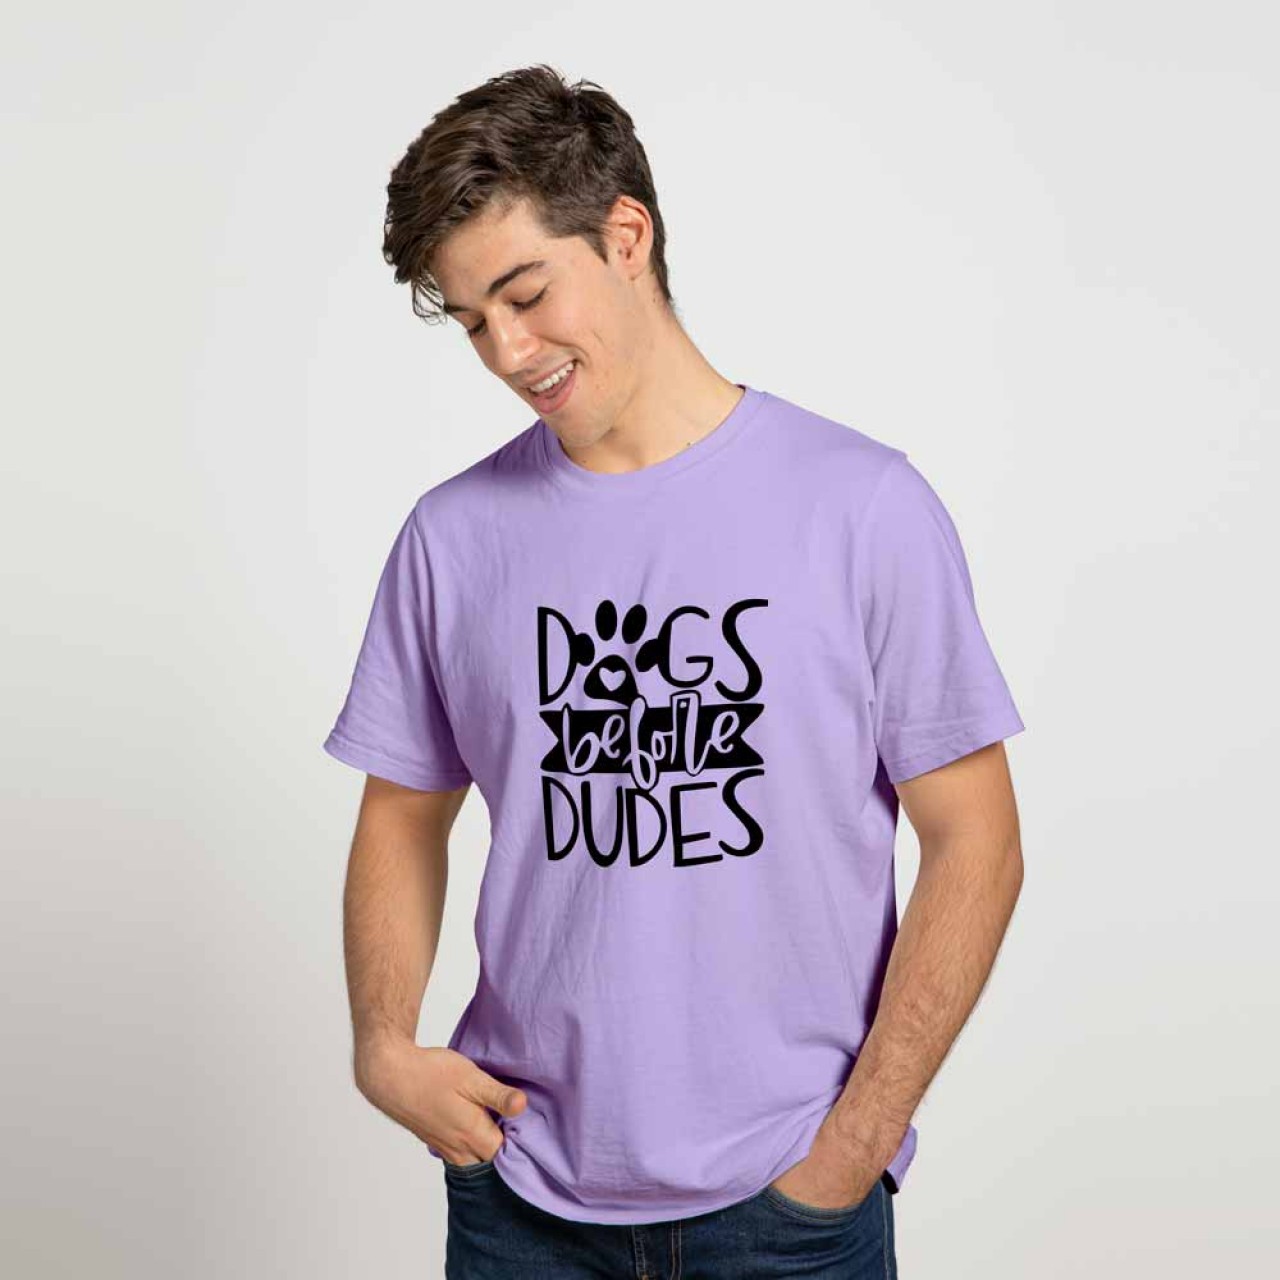 Dogs Before Dude Cotton T-Shirt For Men